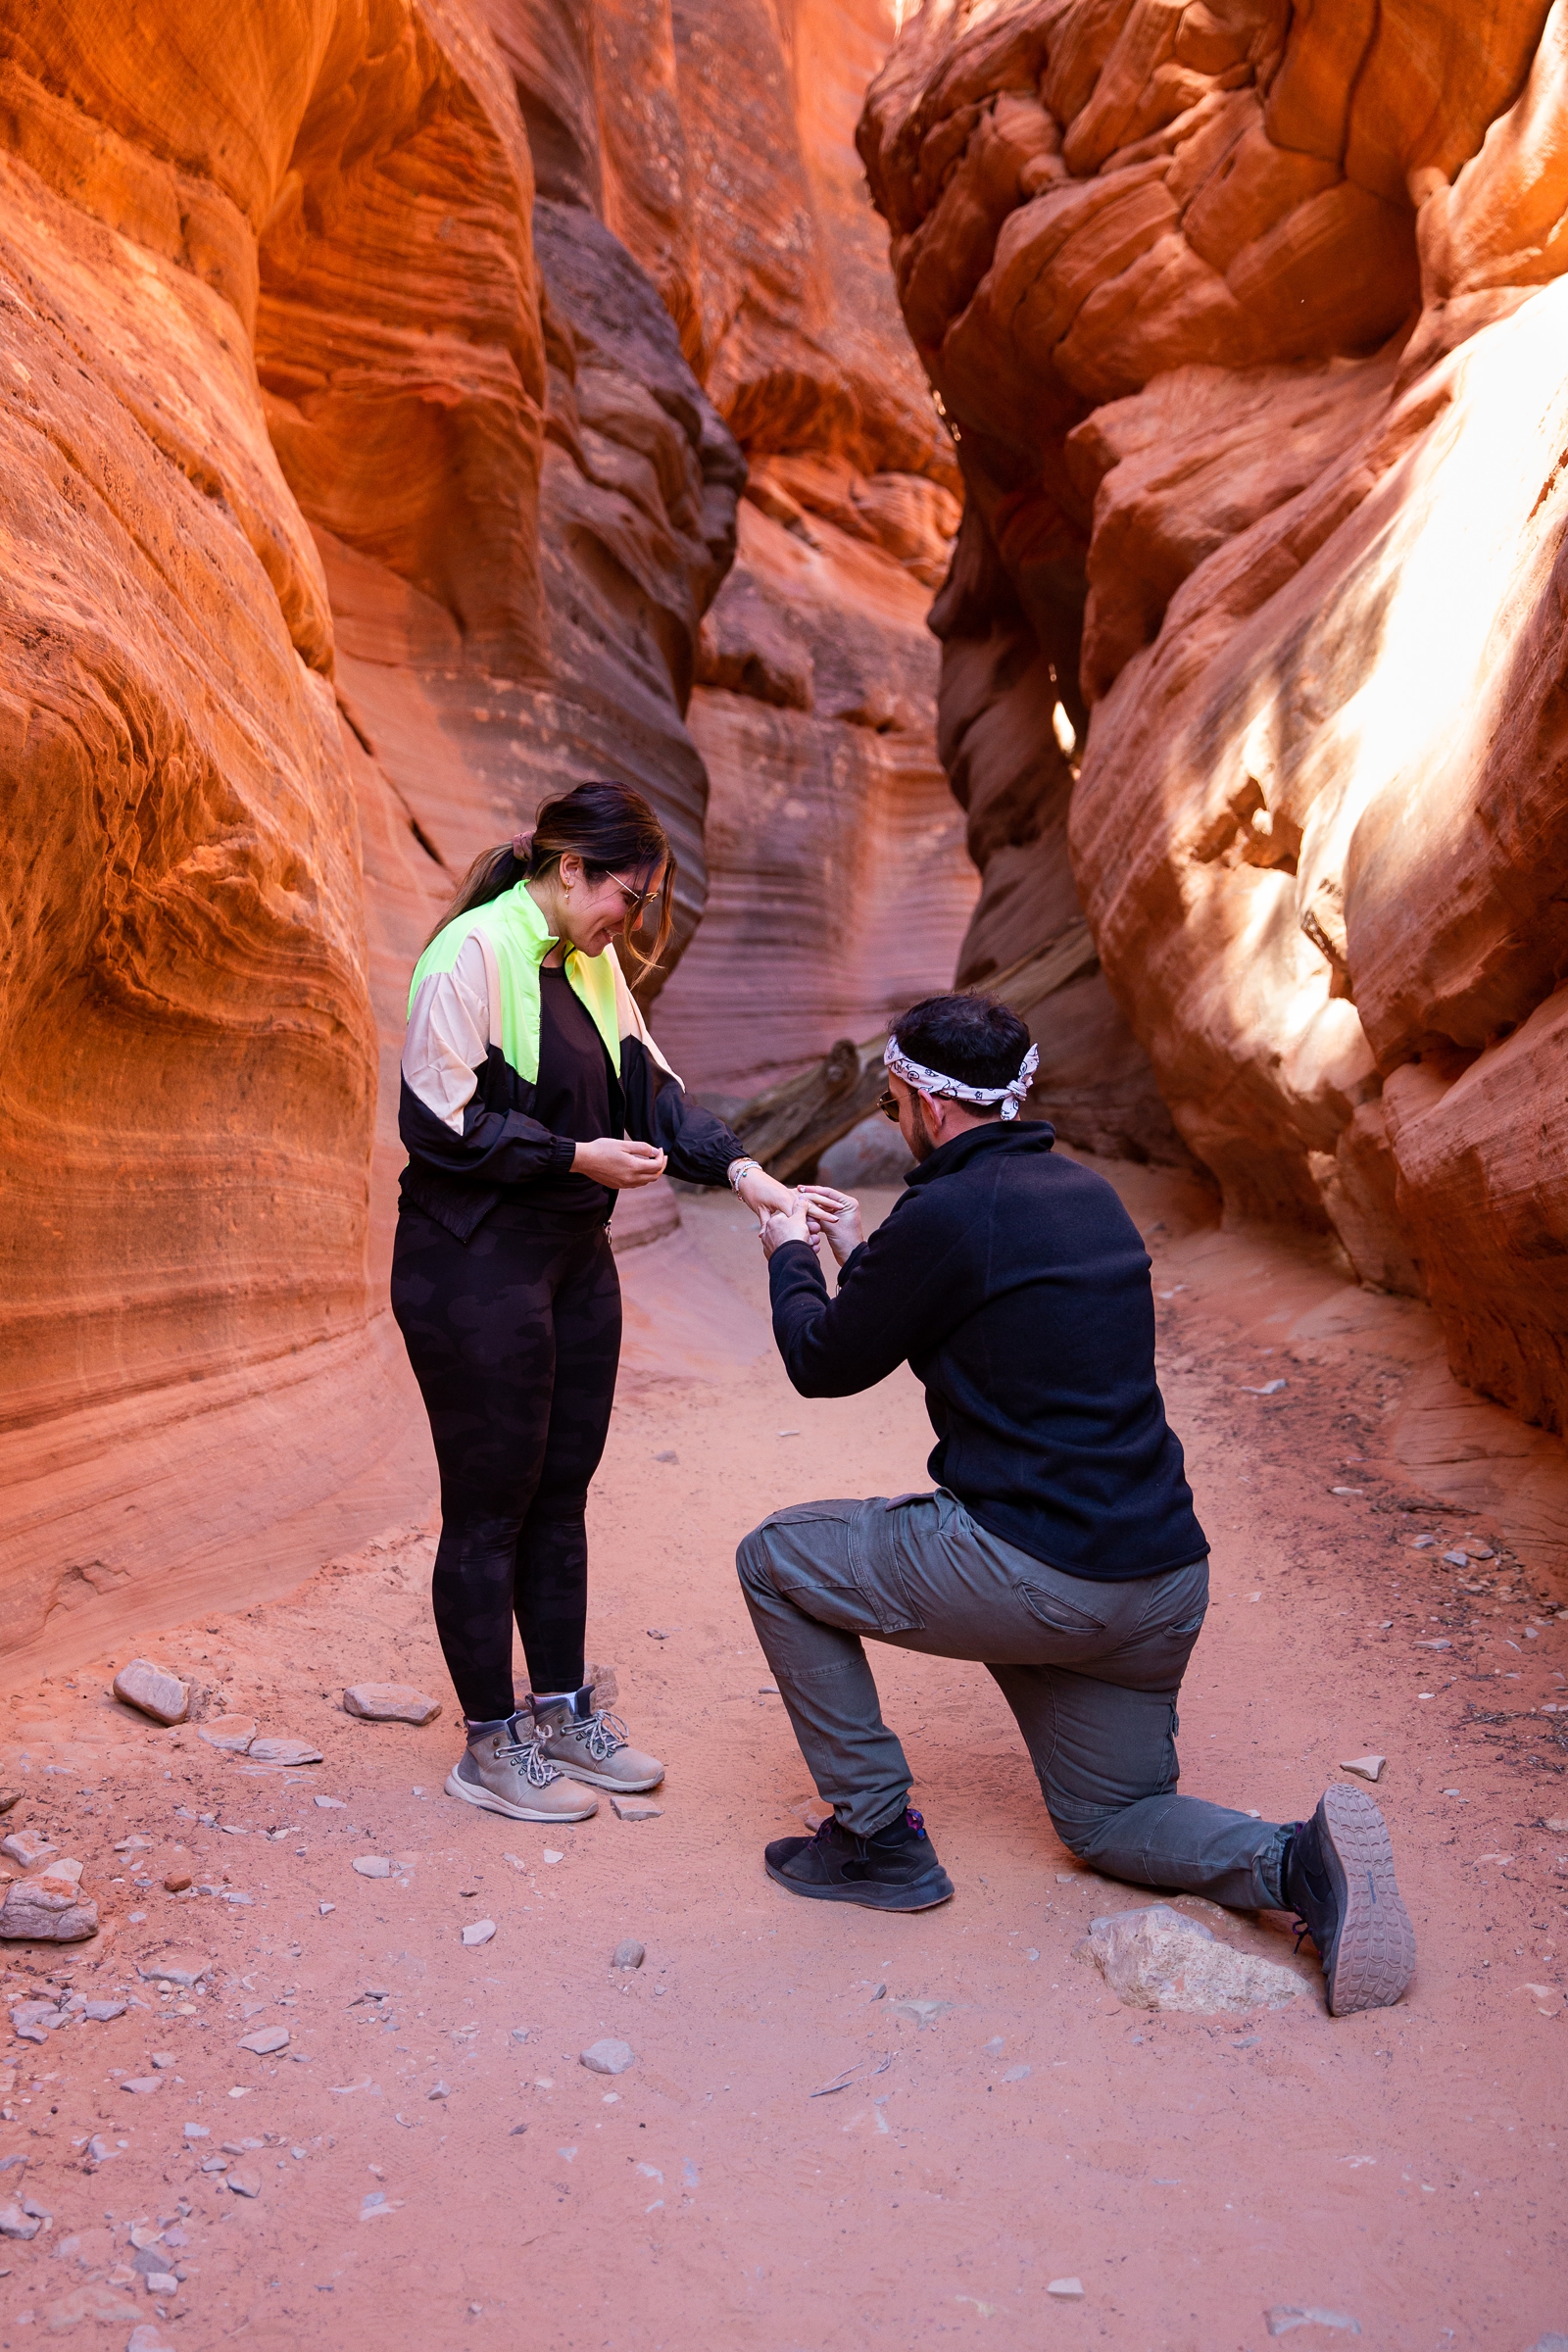 A guy down on his knee proposing to and putting the ring on his shocked and surprised girlfriend in the middle of the Utah slot canyon during their adventurous hike